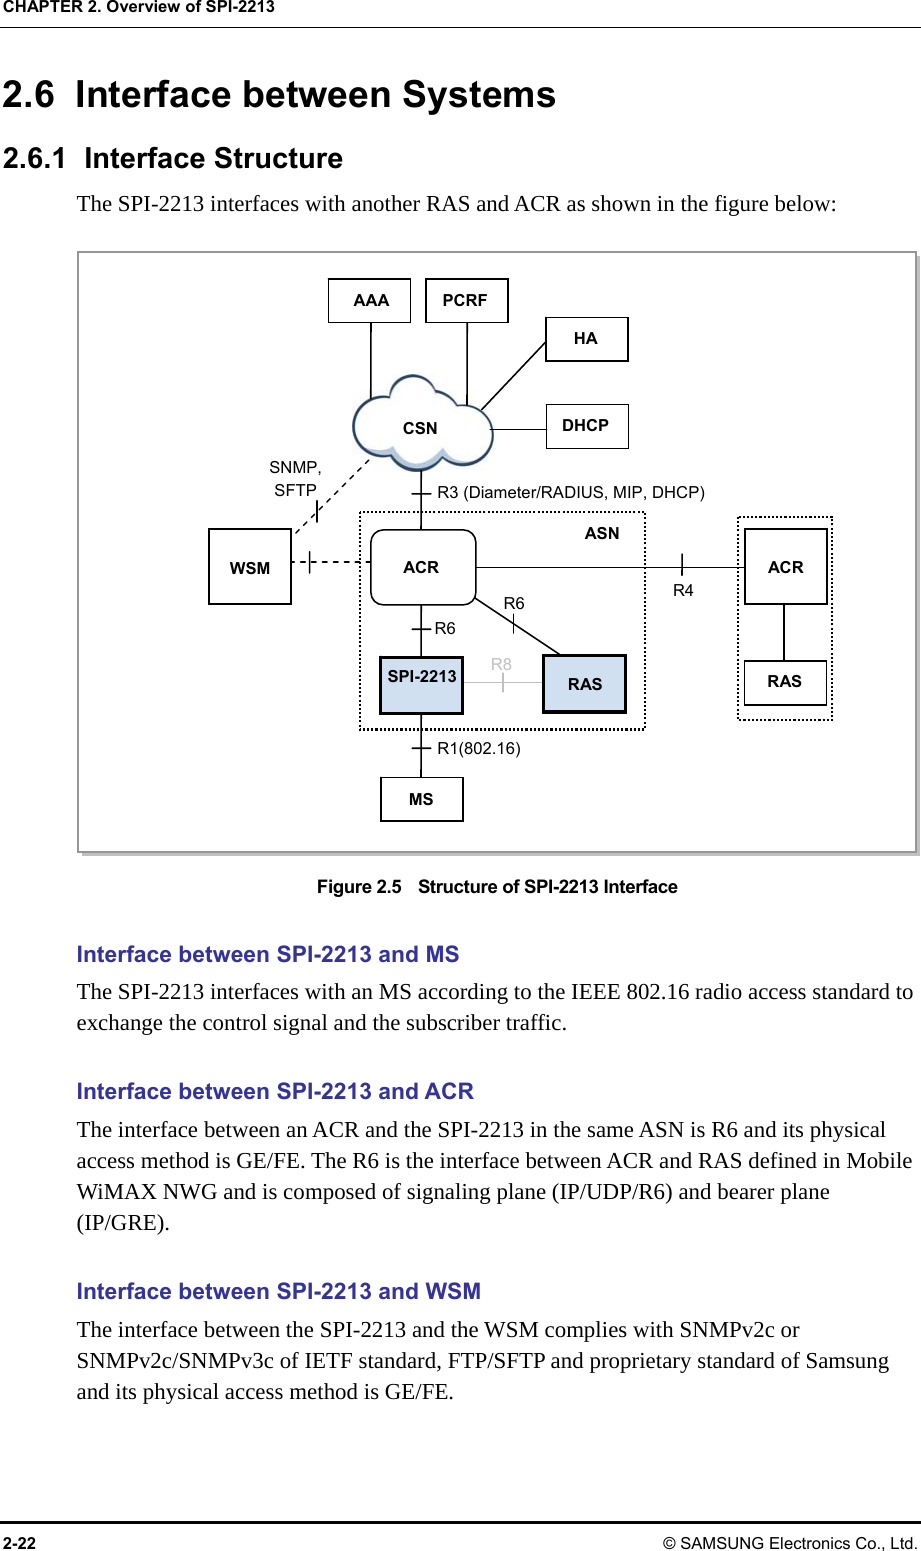 CHAPTER 2. Overview of SPI-2213 2-22 © SAMSUNG Electronics Co., Ltd. 2.6 Interface between Systems 2.6.1 Interface Structure The SPI-2213 interfaces with another RAS and ACR as shown in the figure below:  Figure 2.5    Structure of SPI-2213 Interface  Interface between SPI-2213 and MS The SPI-2213 interfaces with an MS according to the IEEE 802.16 radio access standard to exchange the control signal and the subscriber traffic.  Interface between SPI-2213 and ACR The interface between an ACR and the SPI-2213 in the same ASN is R6 and its physical access method is GE/FE. The R6 is the interface between ACR and RAS defined in Mobile WiMAX NWG and is composed of signaling plane (IP/UDP/R6) and bearer plane (IP/GRE).  Interface between SPI-2213 and WSM The interface between the SPI-2213 and the WSM complies with SNMPv2c or SNMPv2c/SNMPv3c of IETF standard, FTP/SFTP and proprietary standard of Samsung and its physical access method is GE/FE. CSN AAA ACR R3 (Diameter/RADIUS, MIP, DHCP) R6 R1(802.16) R4SNMP, SFTP PCRF MS WSM SPI-2213 RASR6 R8 ACRRAS HA ASN DHCP